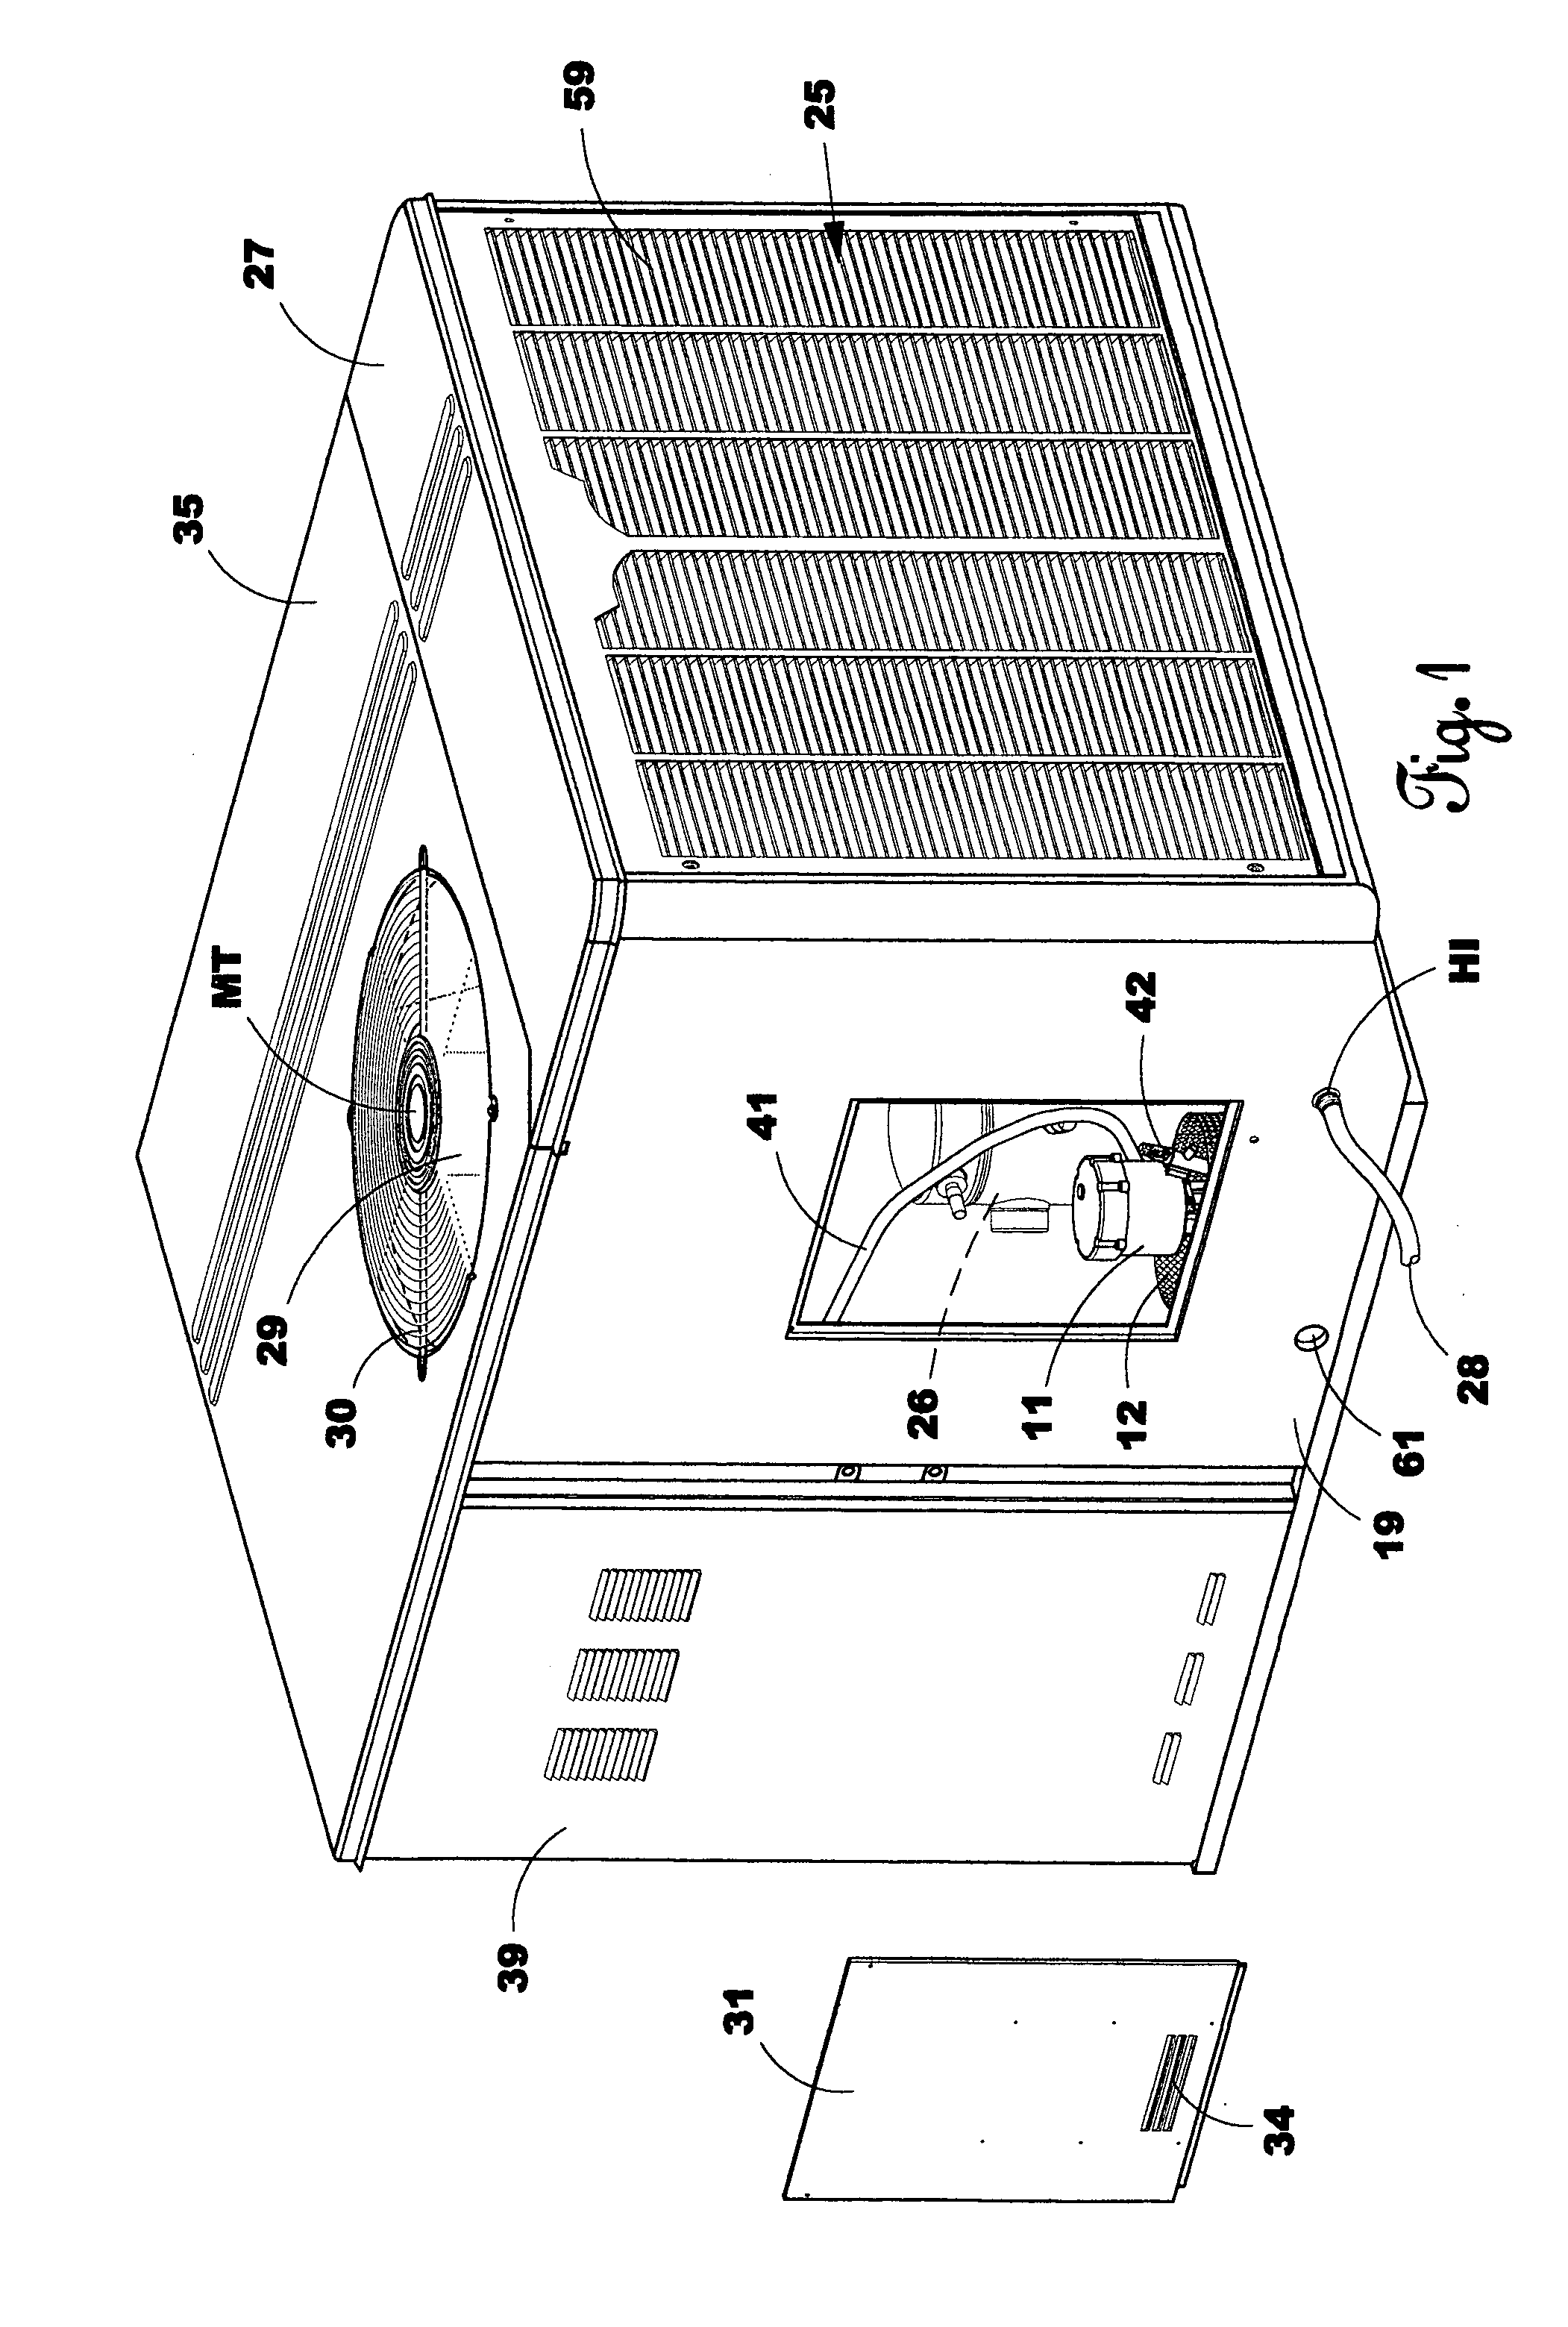 Heat exchanger apparatus and method for evaporative cooling refrigeration unit